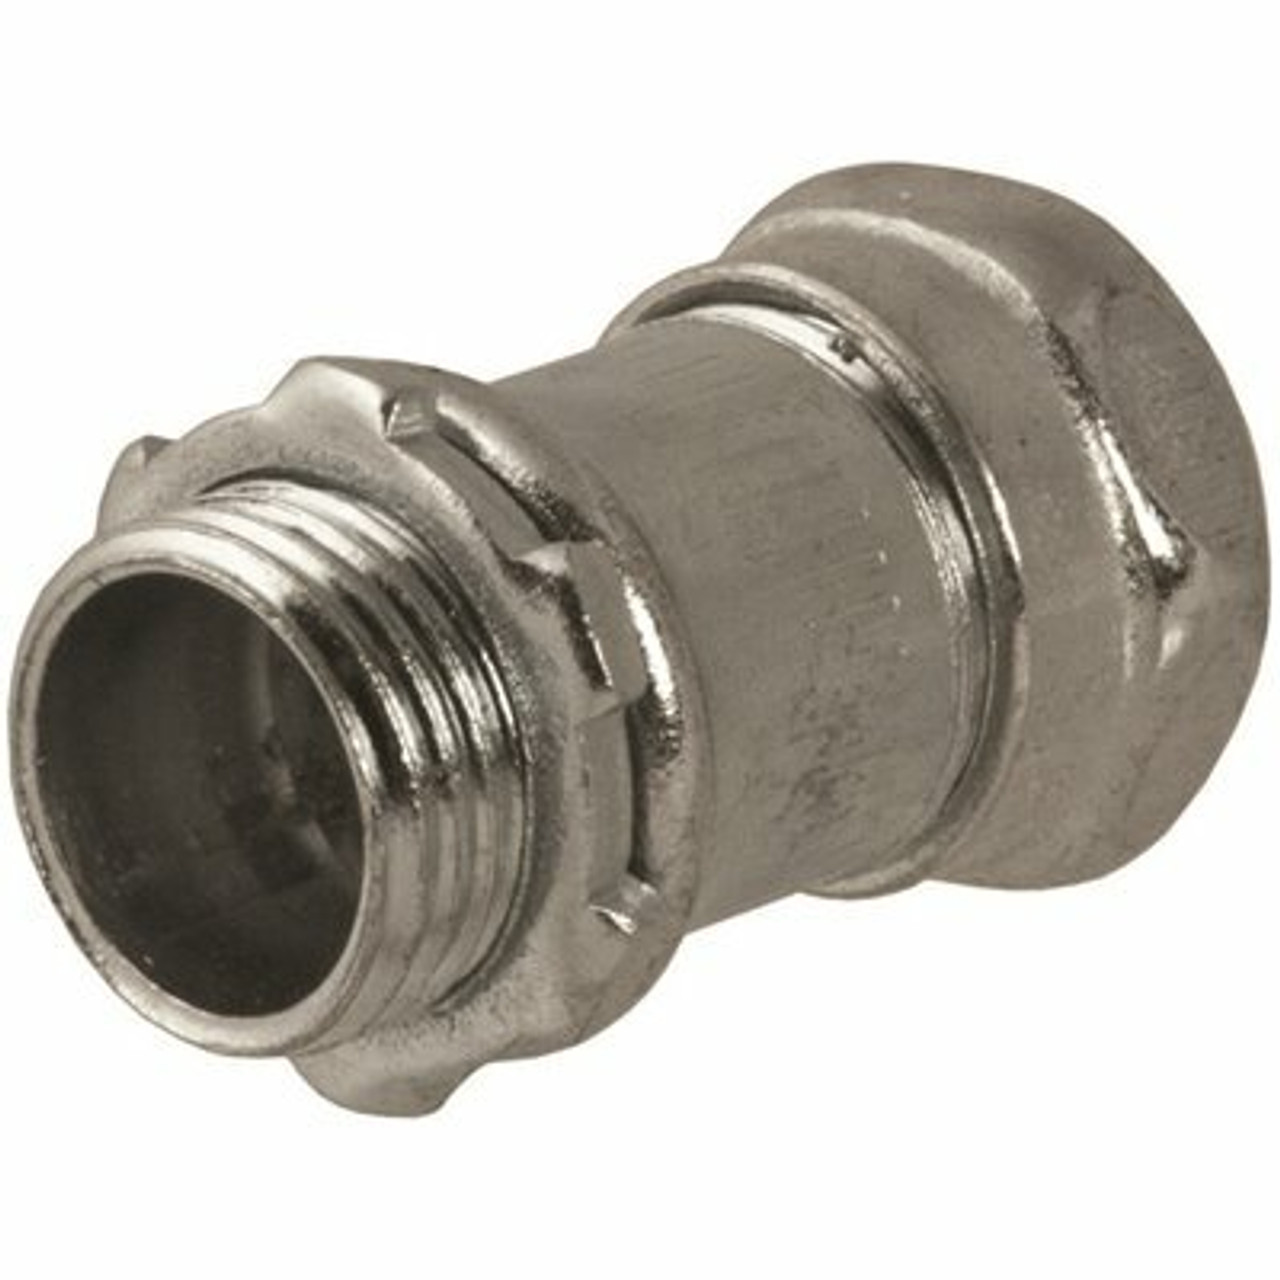 Raco 3/4 In. Emt Compression Connector, Uninsulated